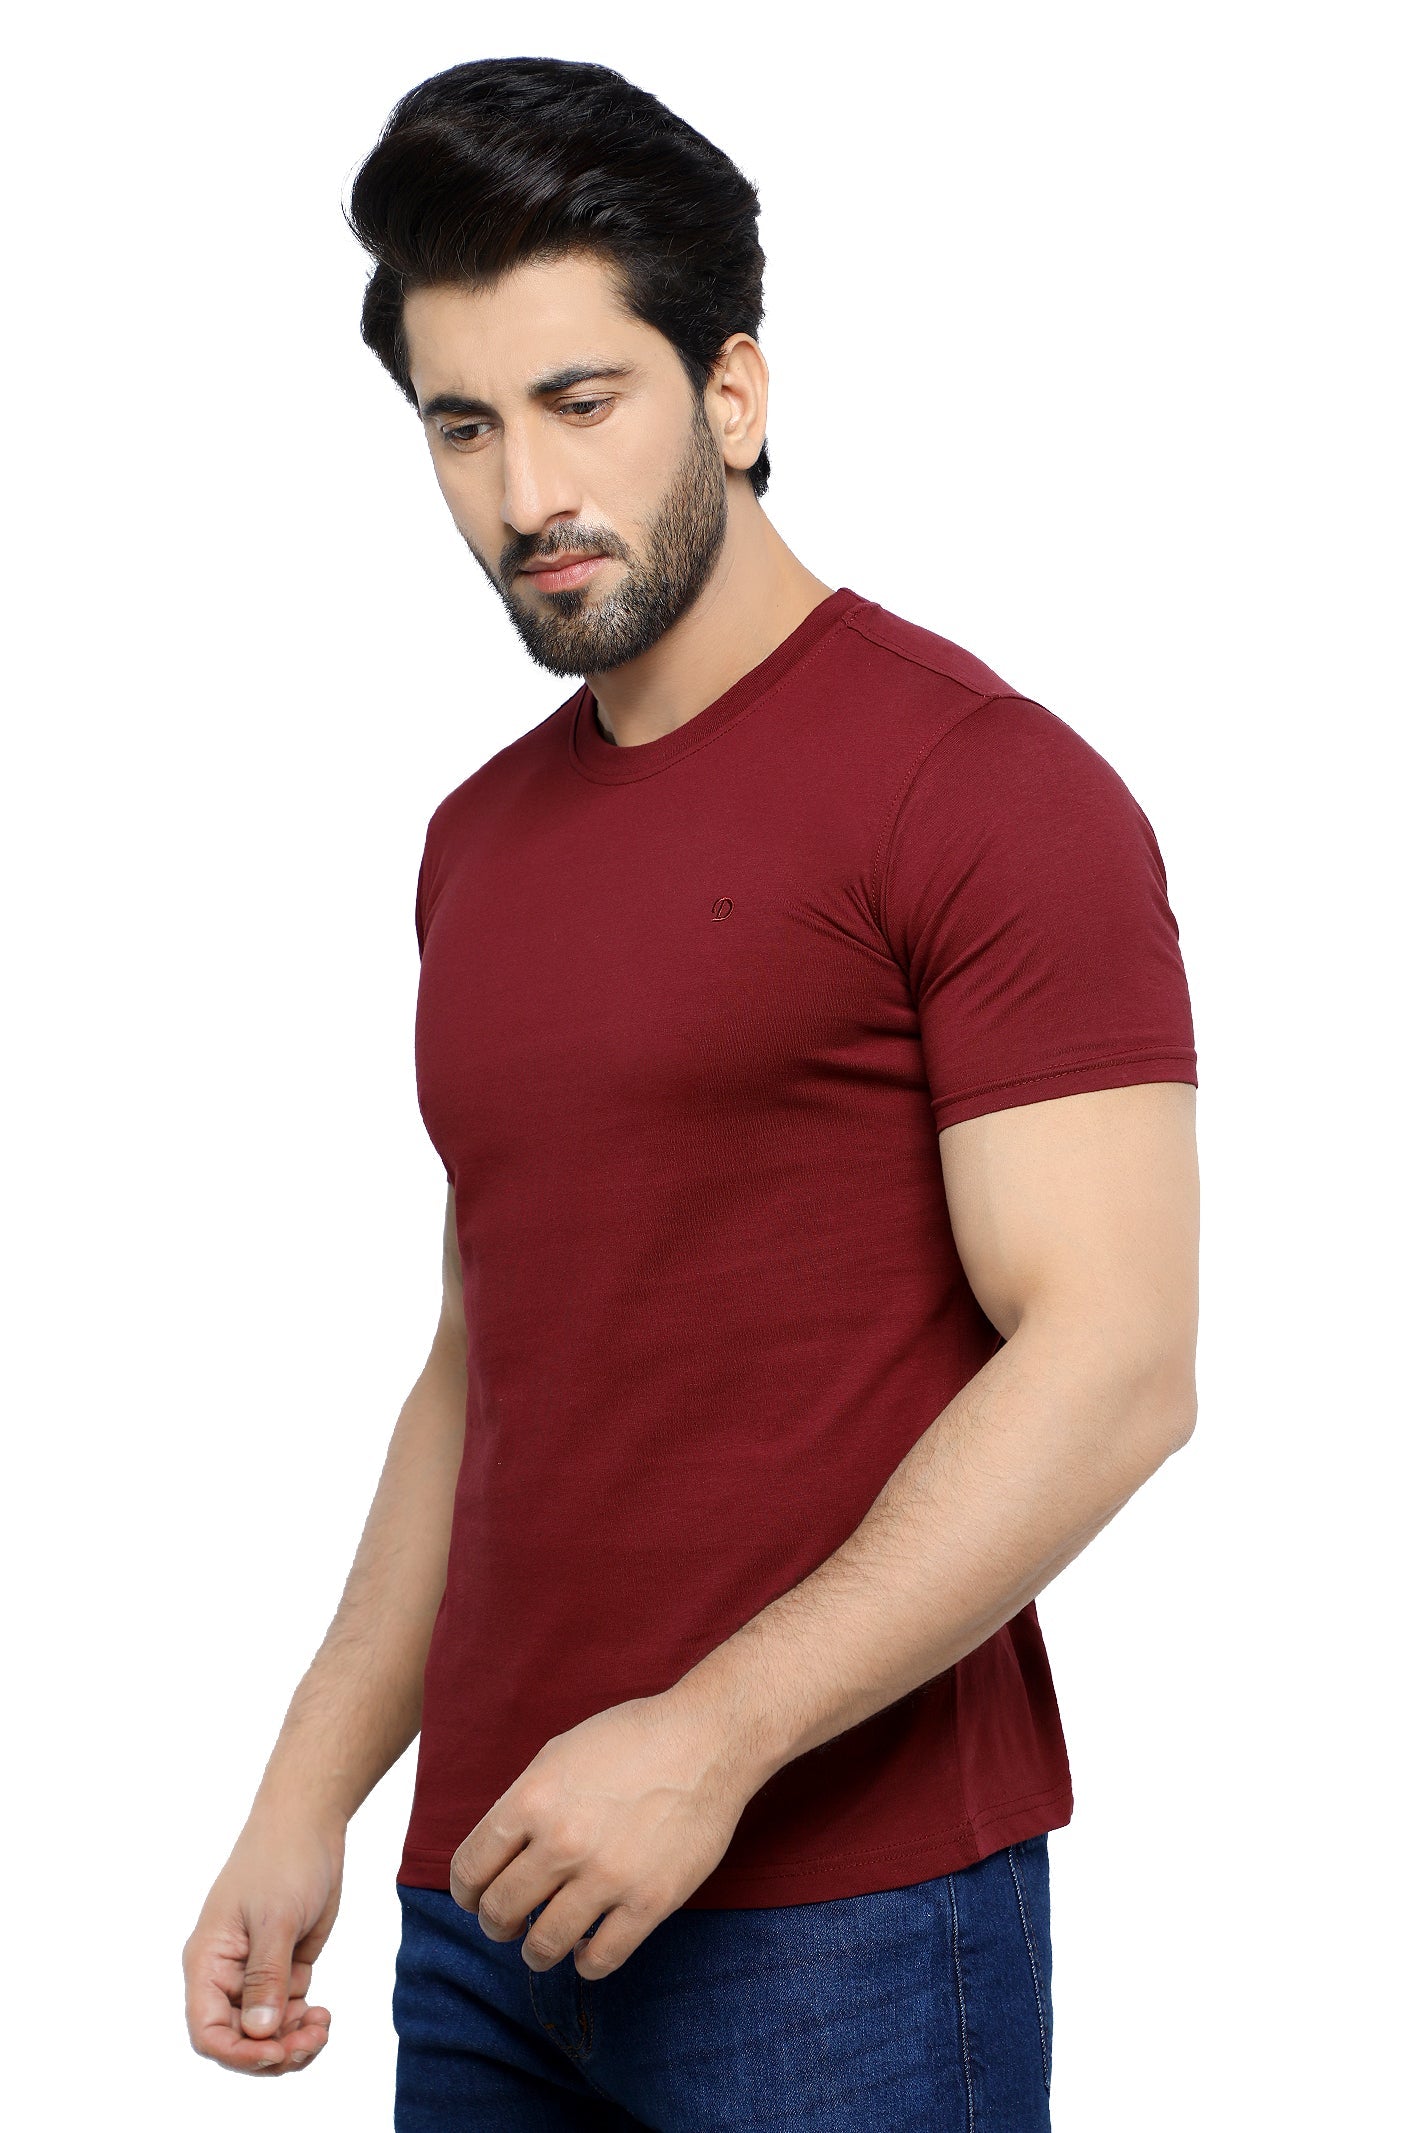 Diners Mens Round Neck T-Shirt SKU: NA856-MAROON - Diners